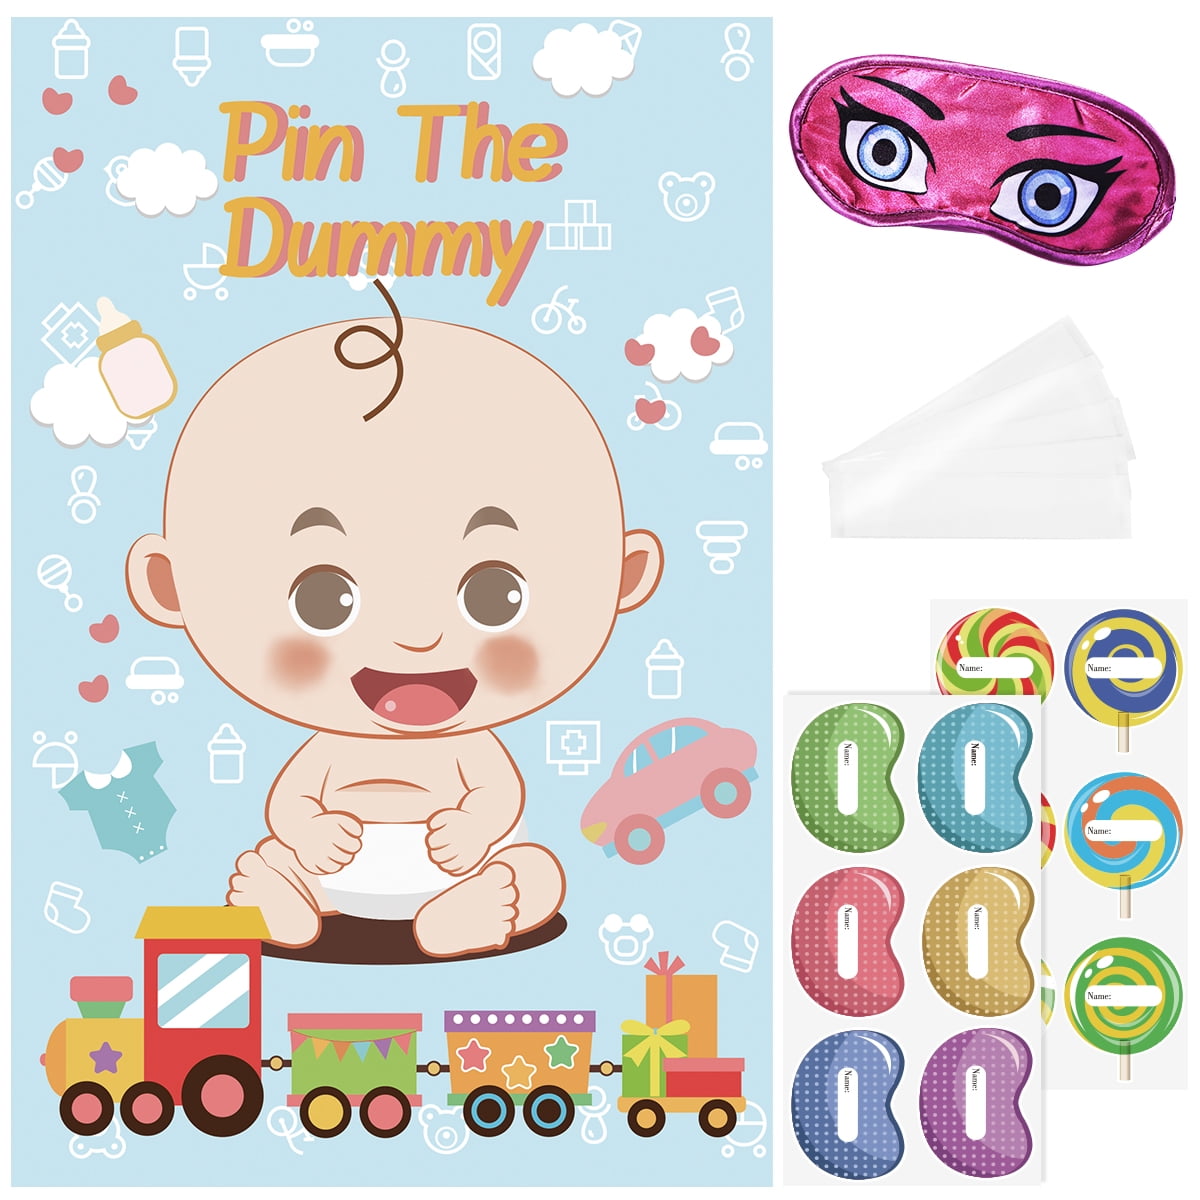 Baby Shower Mum to Be PIN Stick the Dummy on the Baby 16 x EXTRA Stickers 